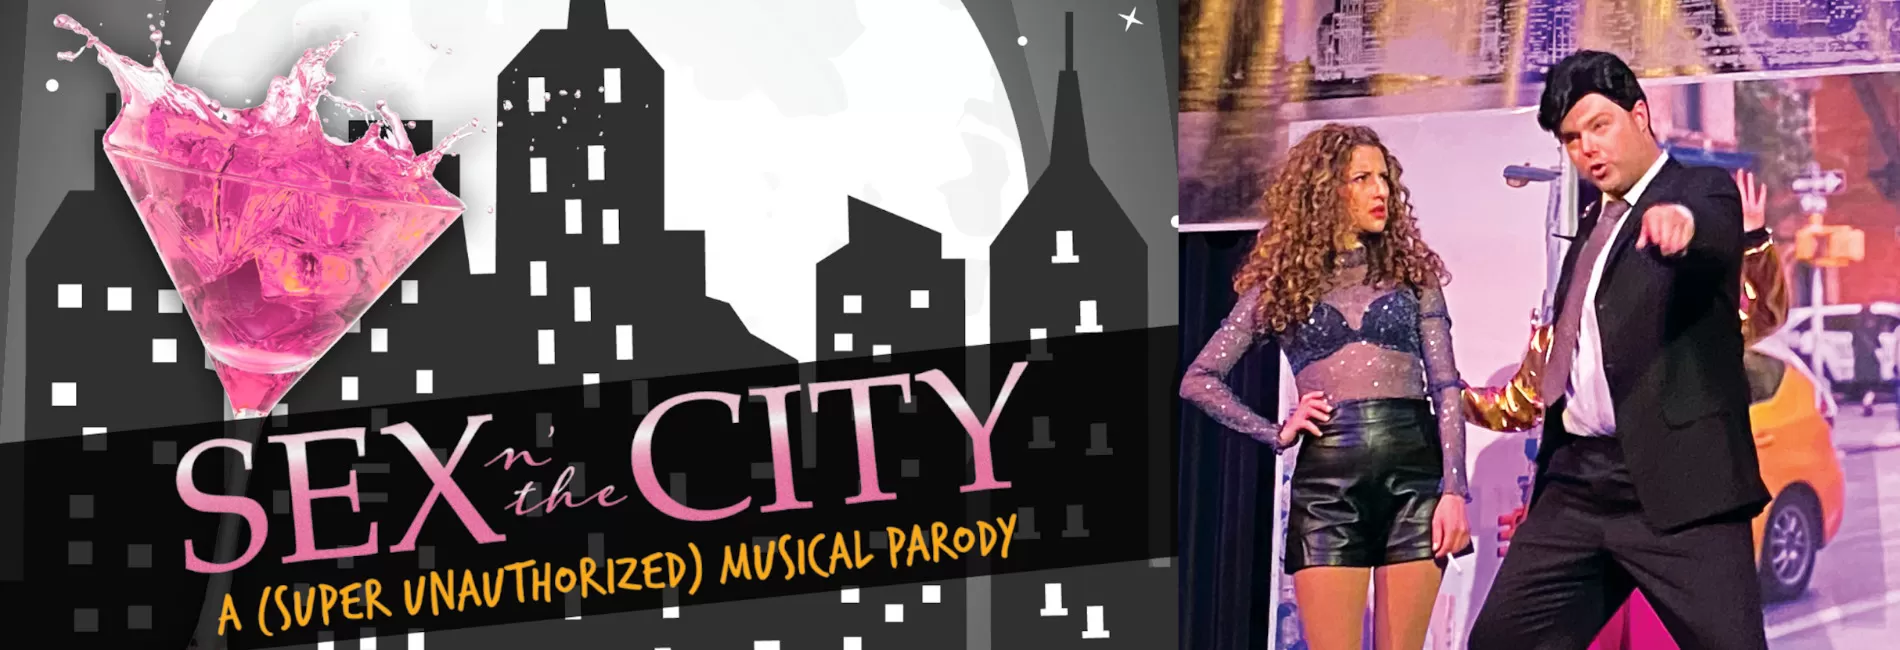 Sex n’ The City: The “Super” Unauthorized Musical Parody